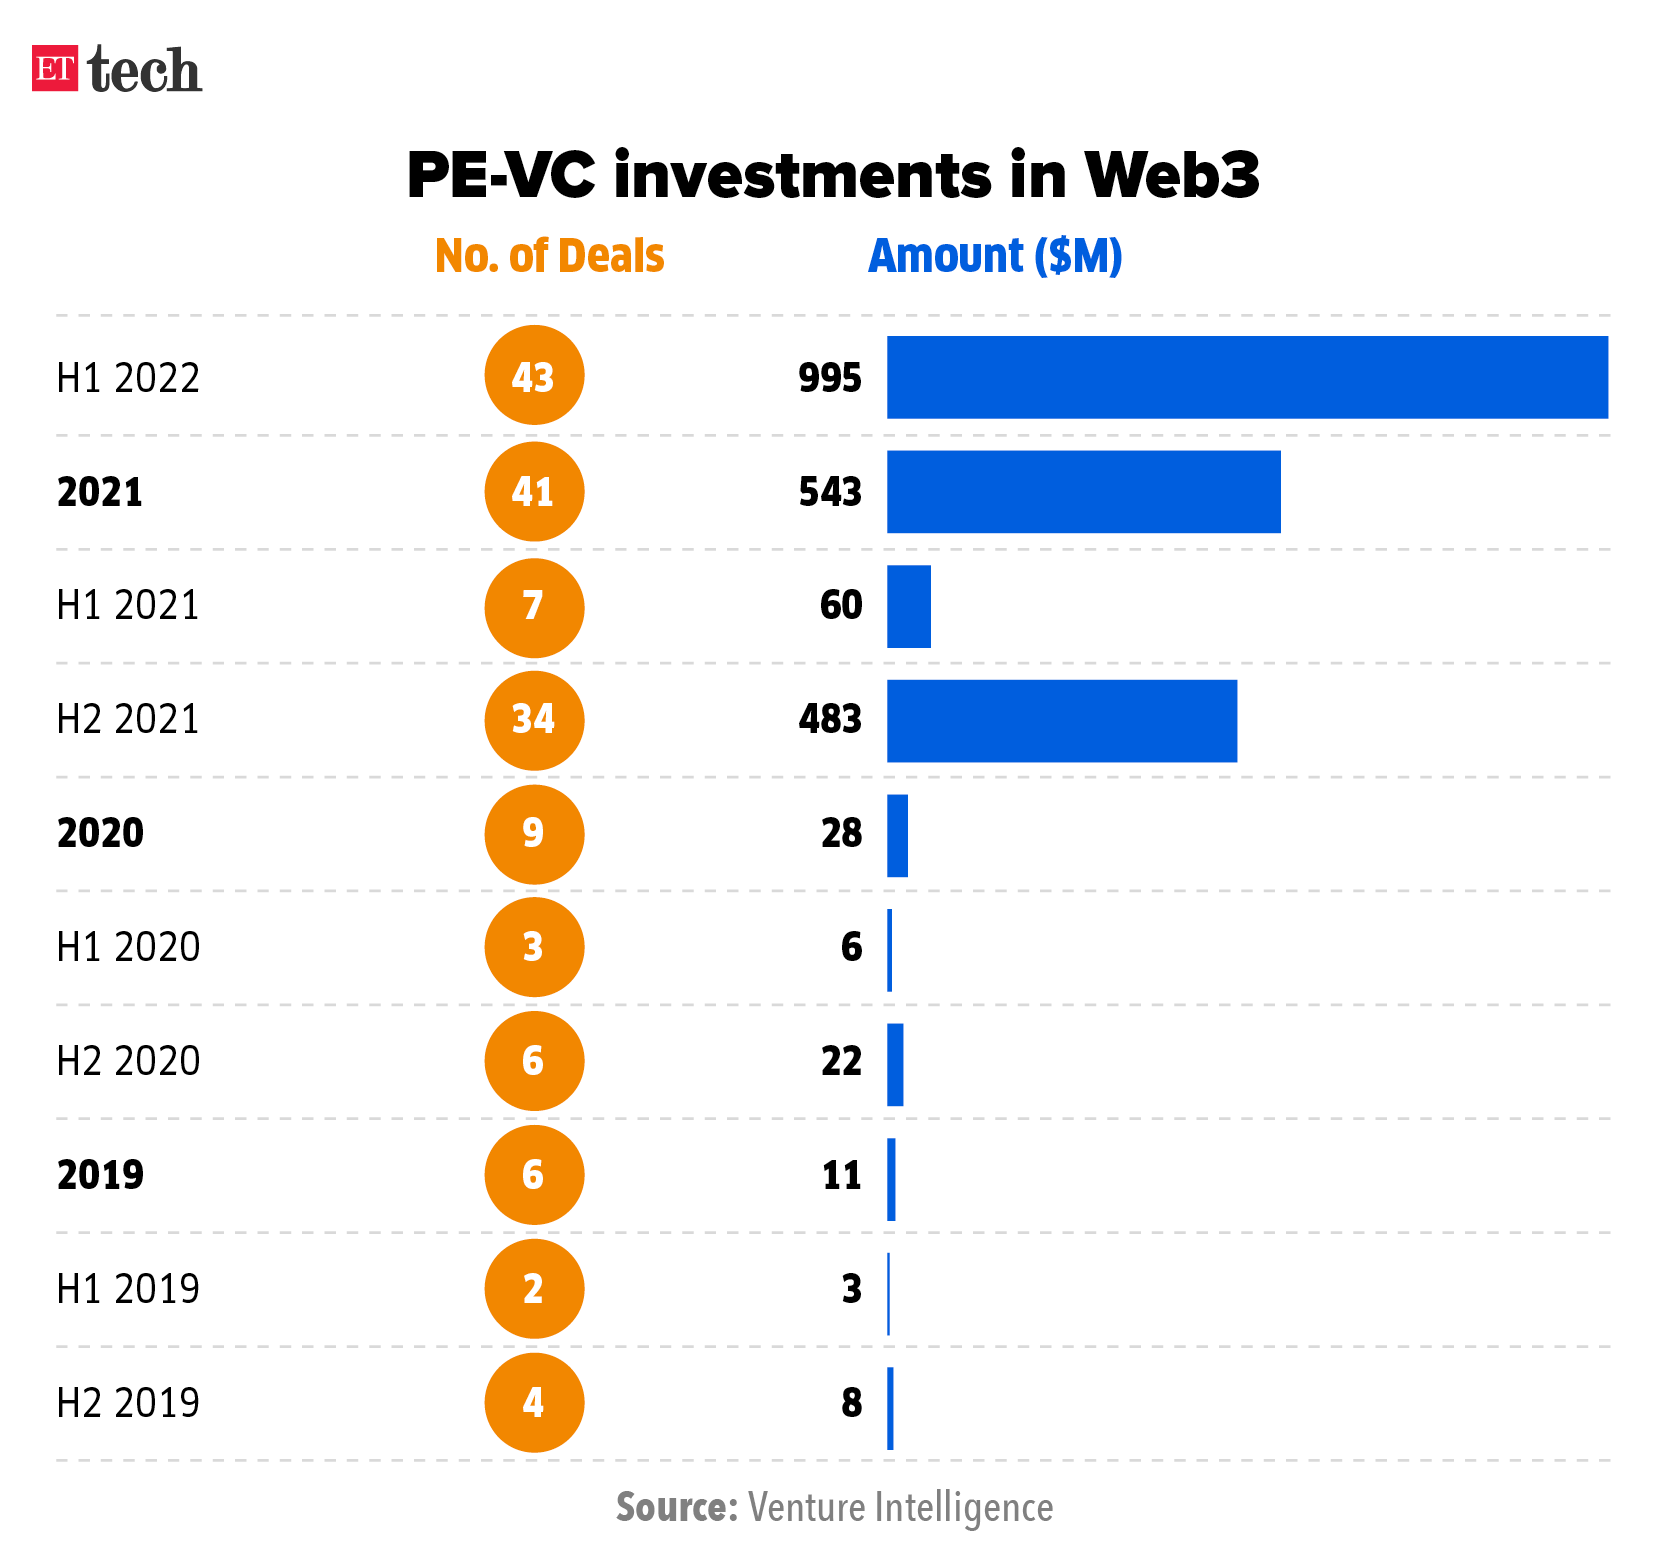 PE-VC investments in Web3